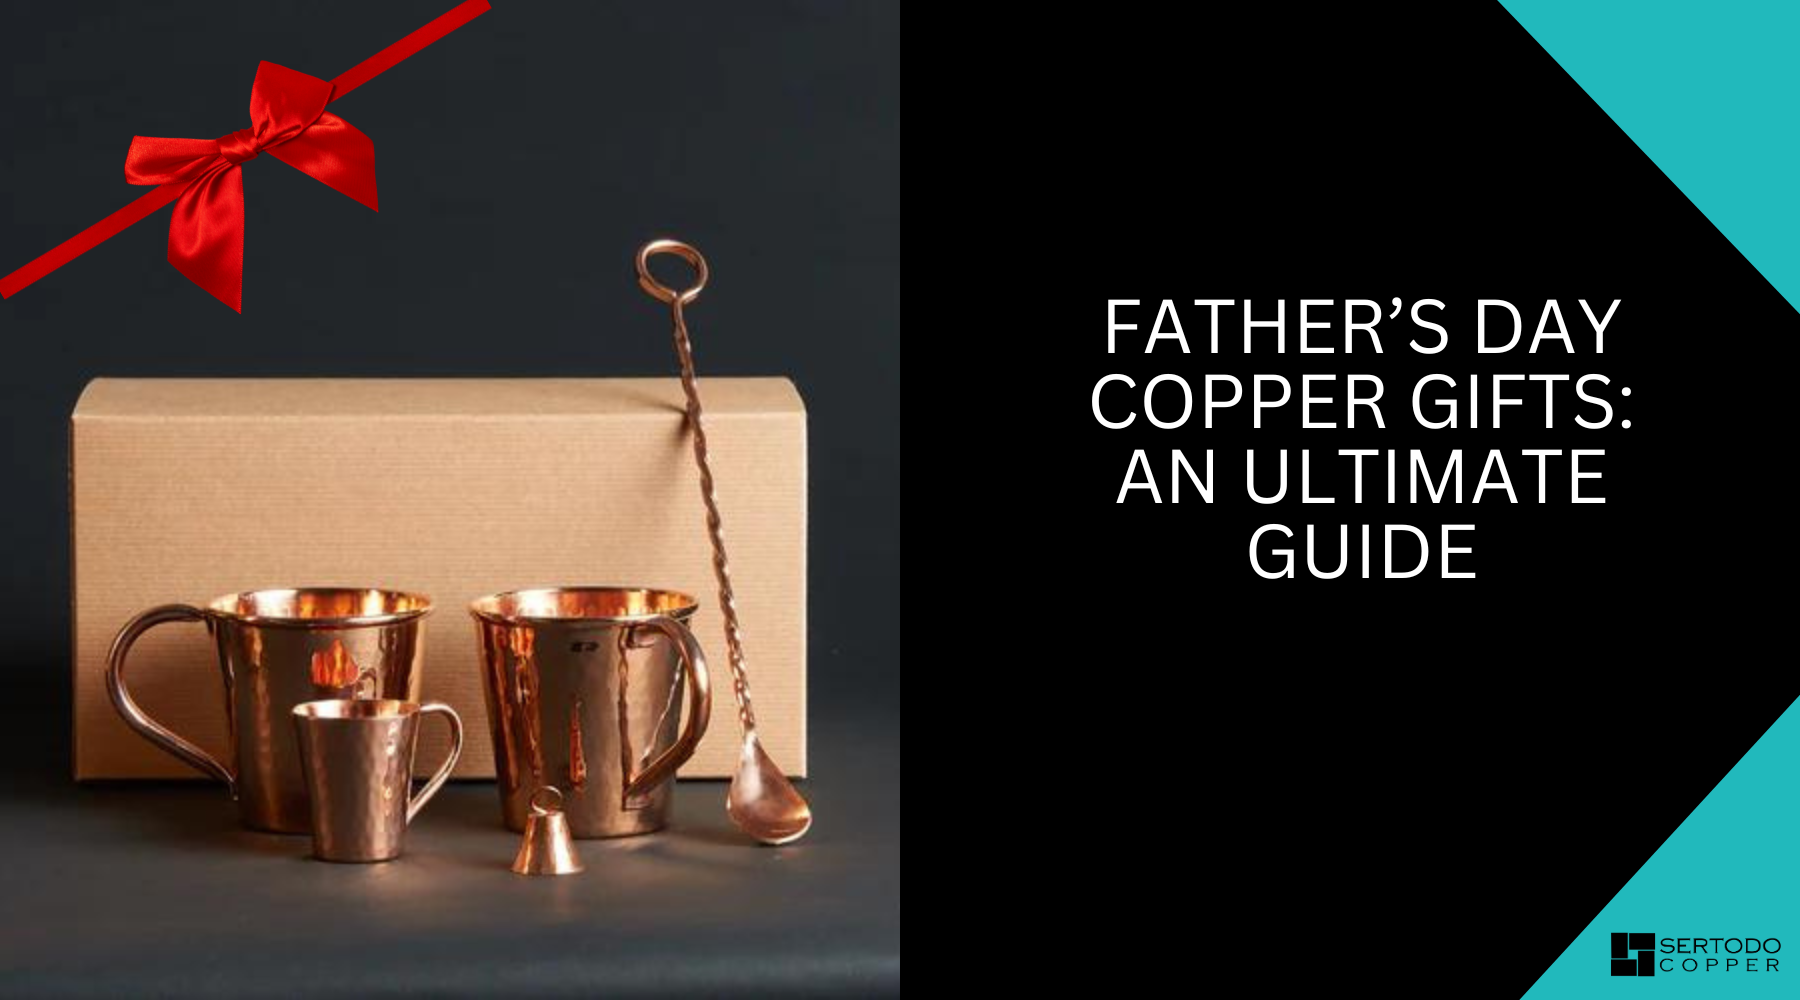 Father's Day Copper Gifts: An Ultimate Guide